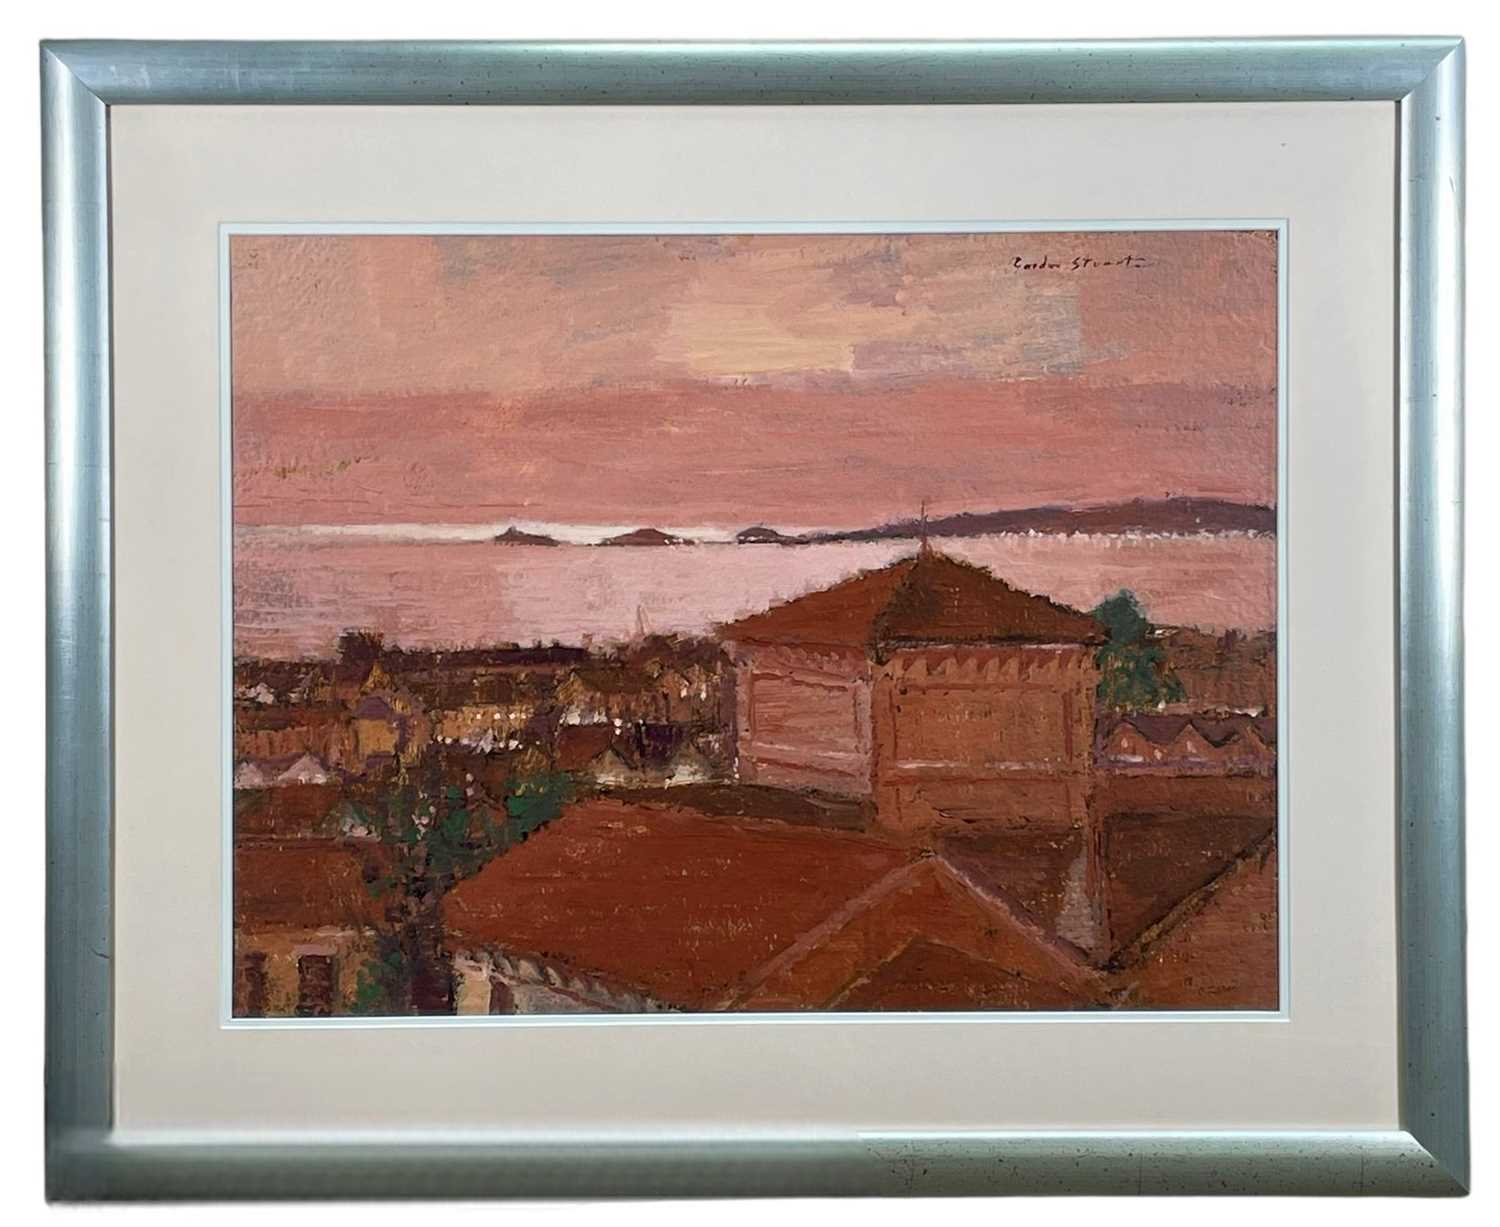 ‡ GORDON STUART (1924-2015) oil on paper - view of Swansea Bay from the late artist's home, - Image 2 of 2